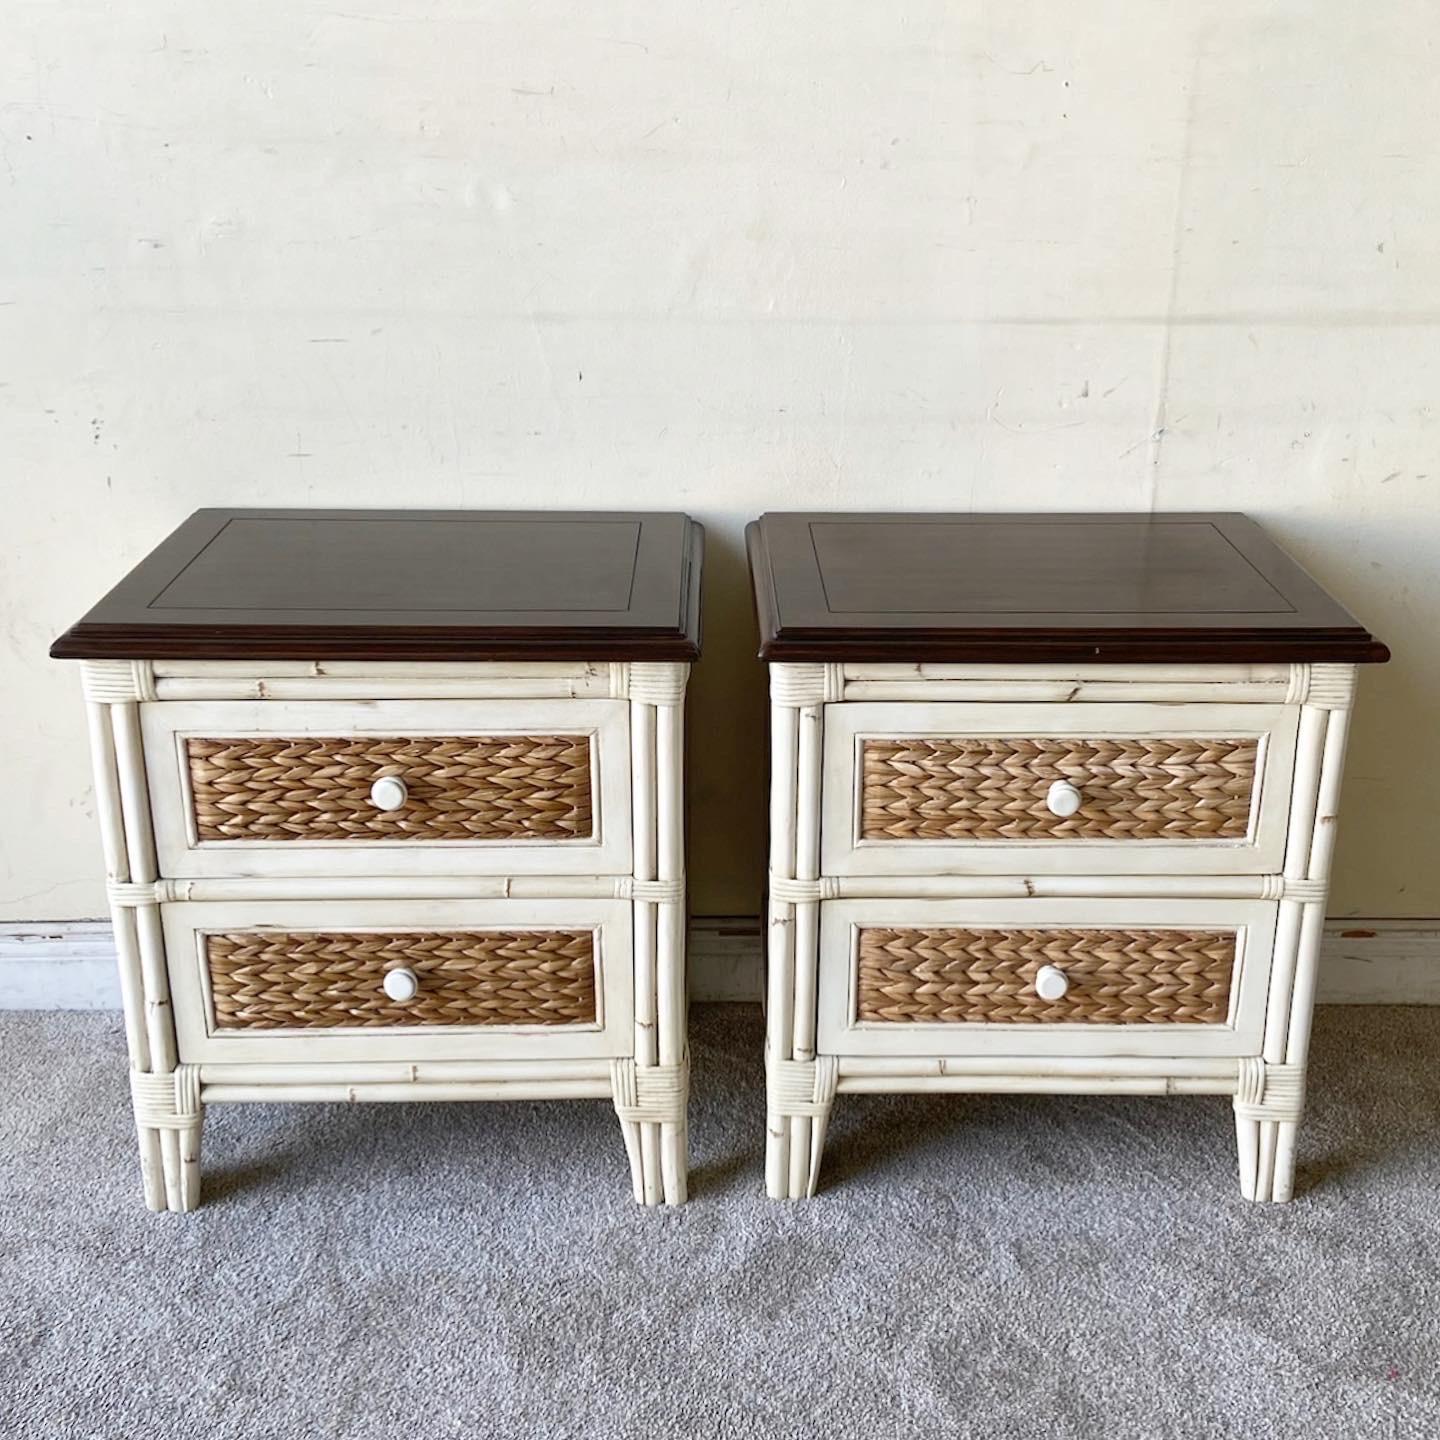 Amazing pair of bohemian nighstands. Each feature a brown wooden top with an off white/cream bamboo rattan frame and sea grass drawer panels.